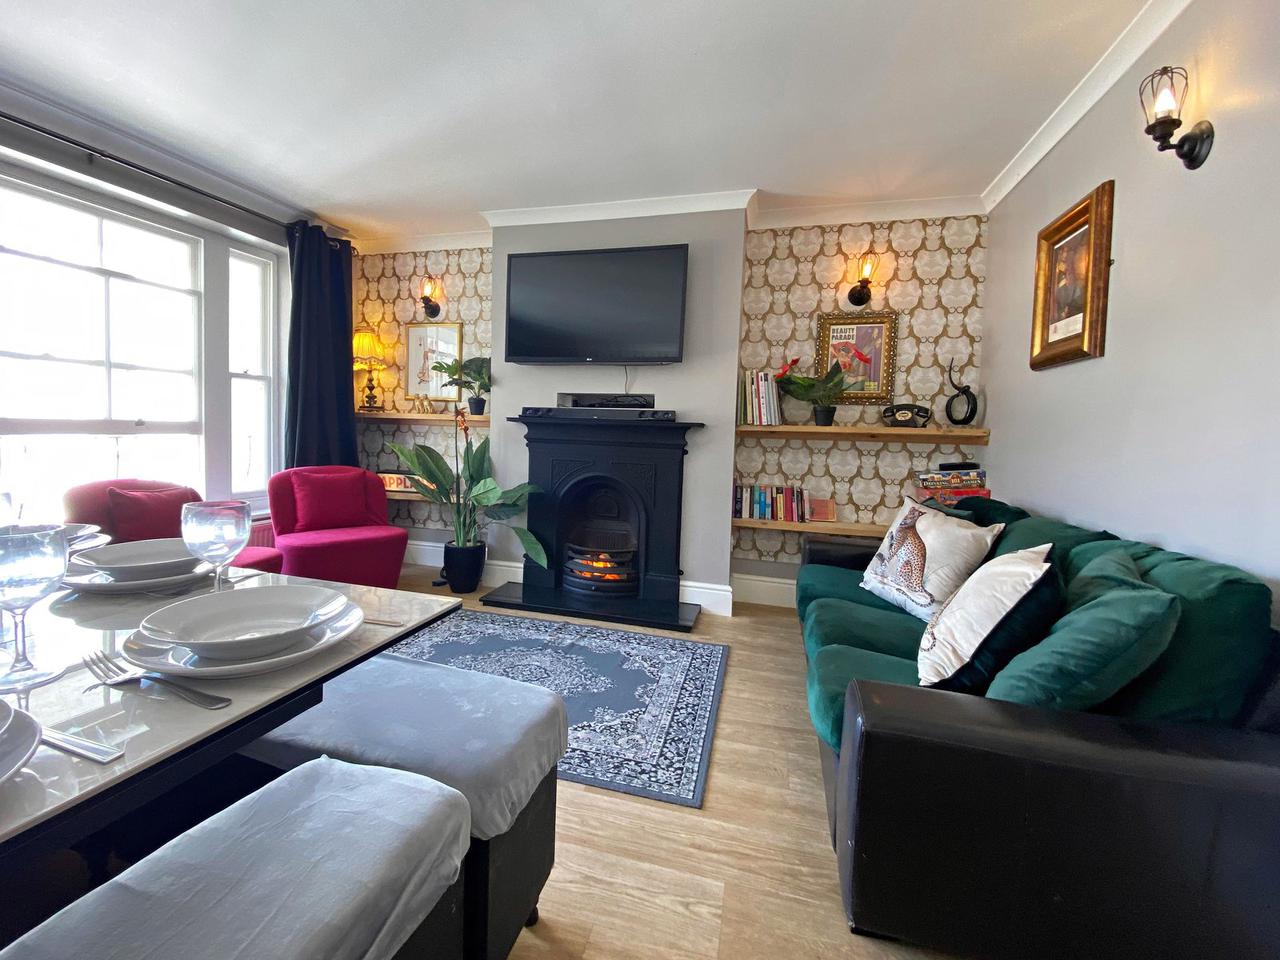 Brighton Parlourama With Hot Tub | Holiday flats, holiday cottages ...